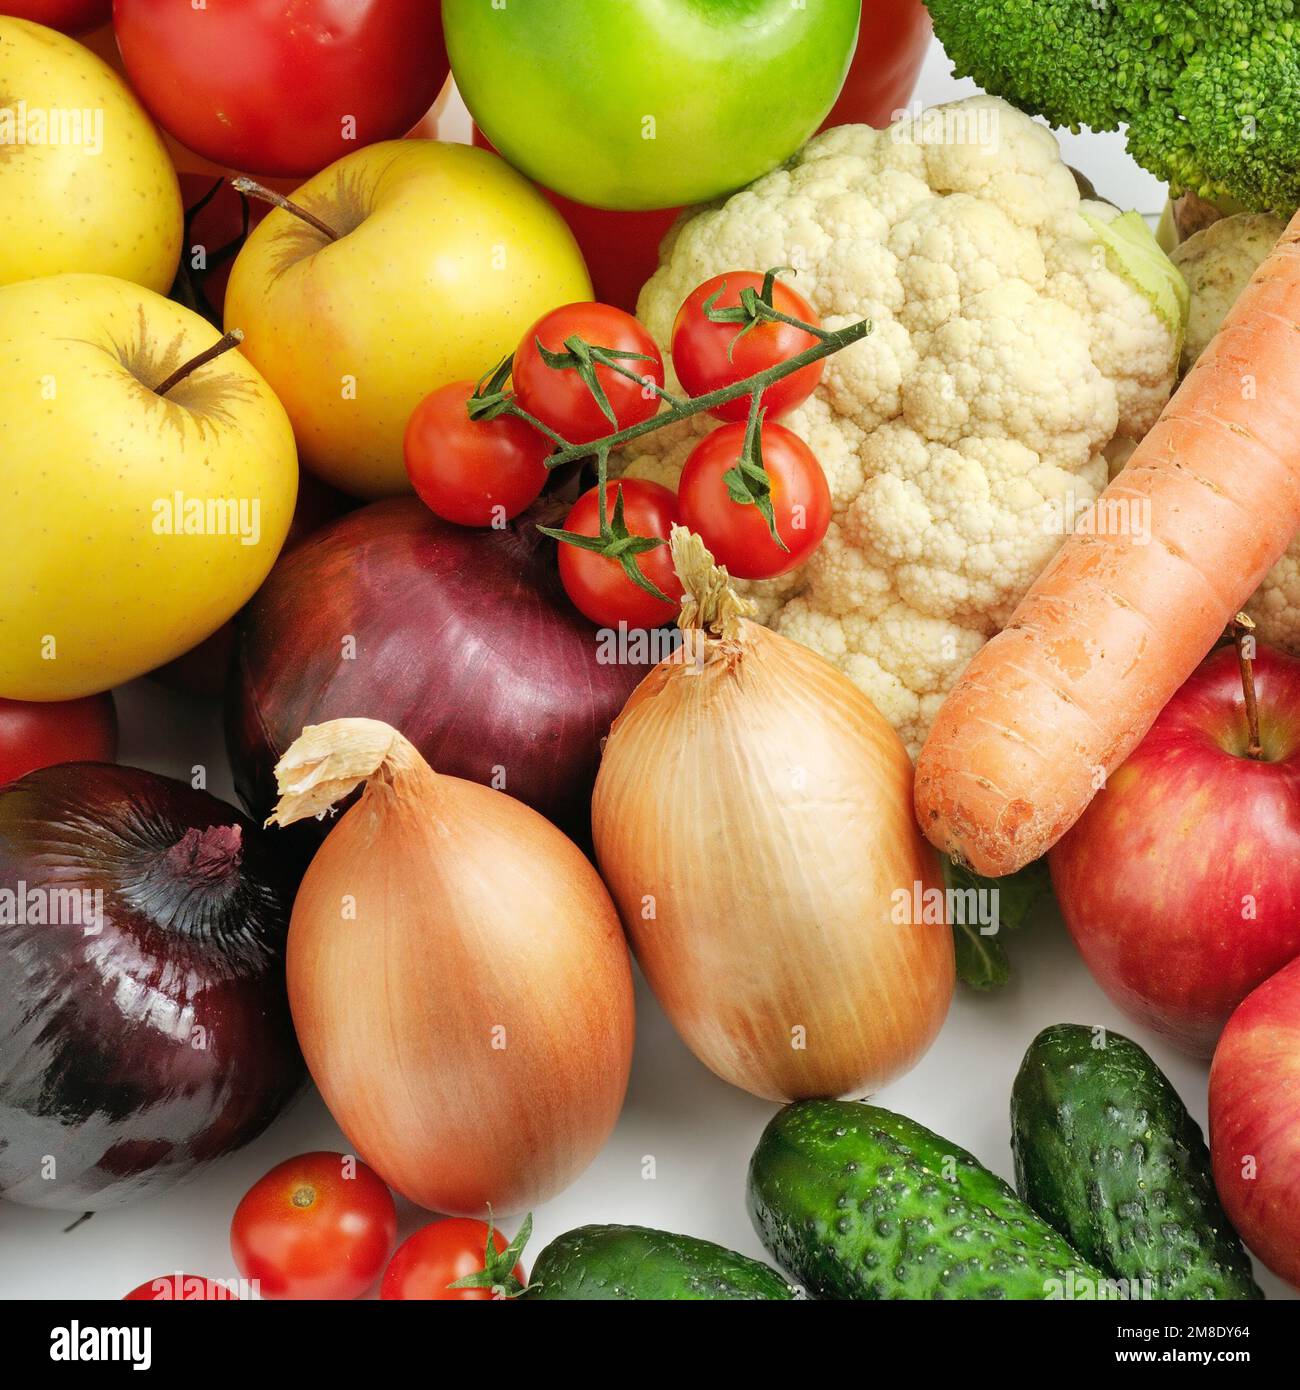 fruits and vegetables background Stock Photo